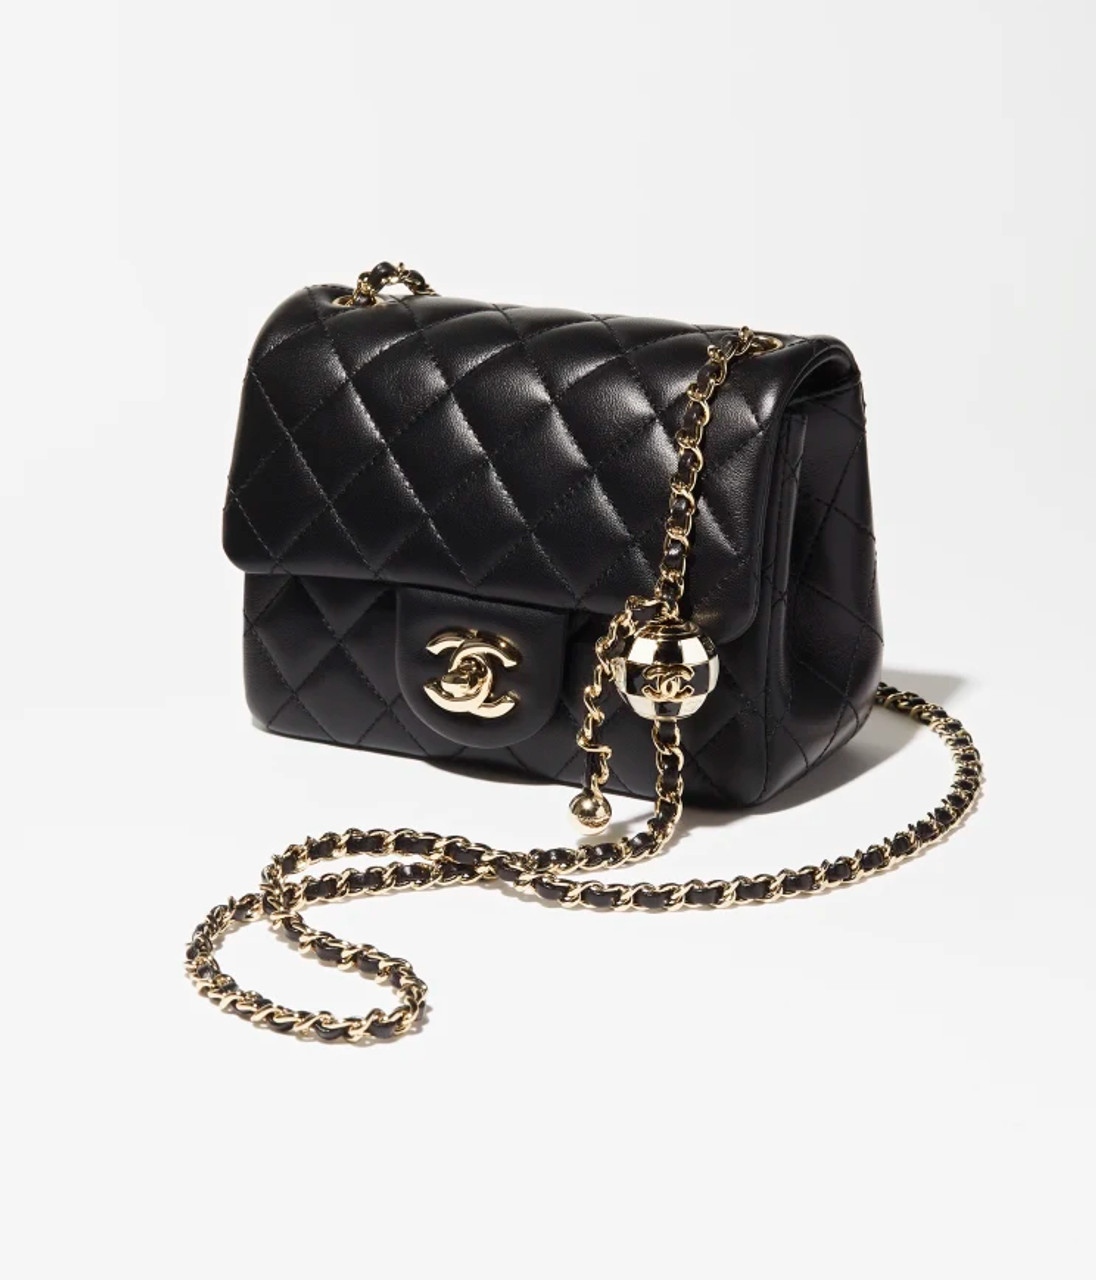 chanel small leather purse